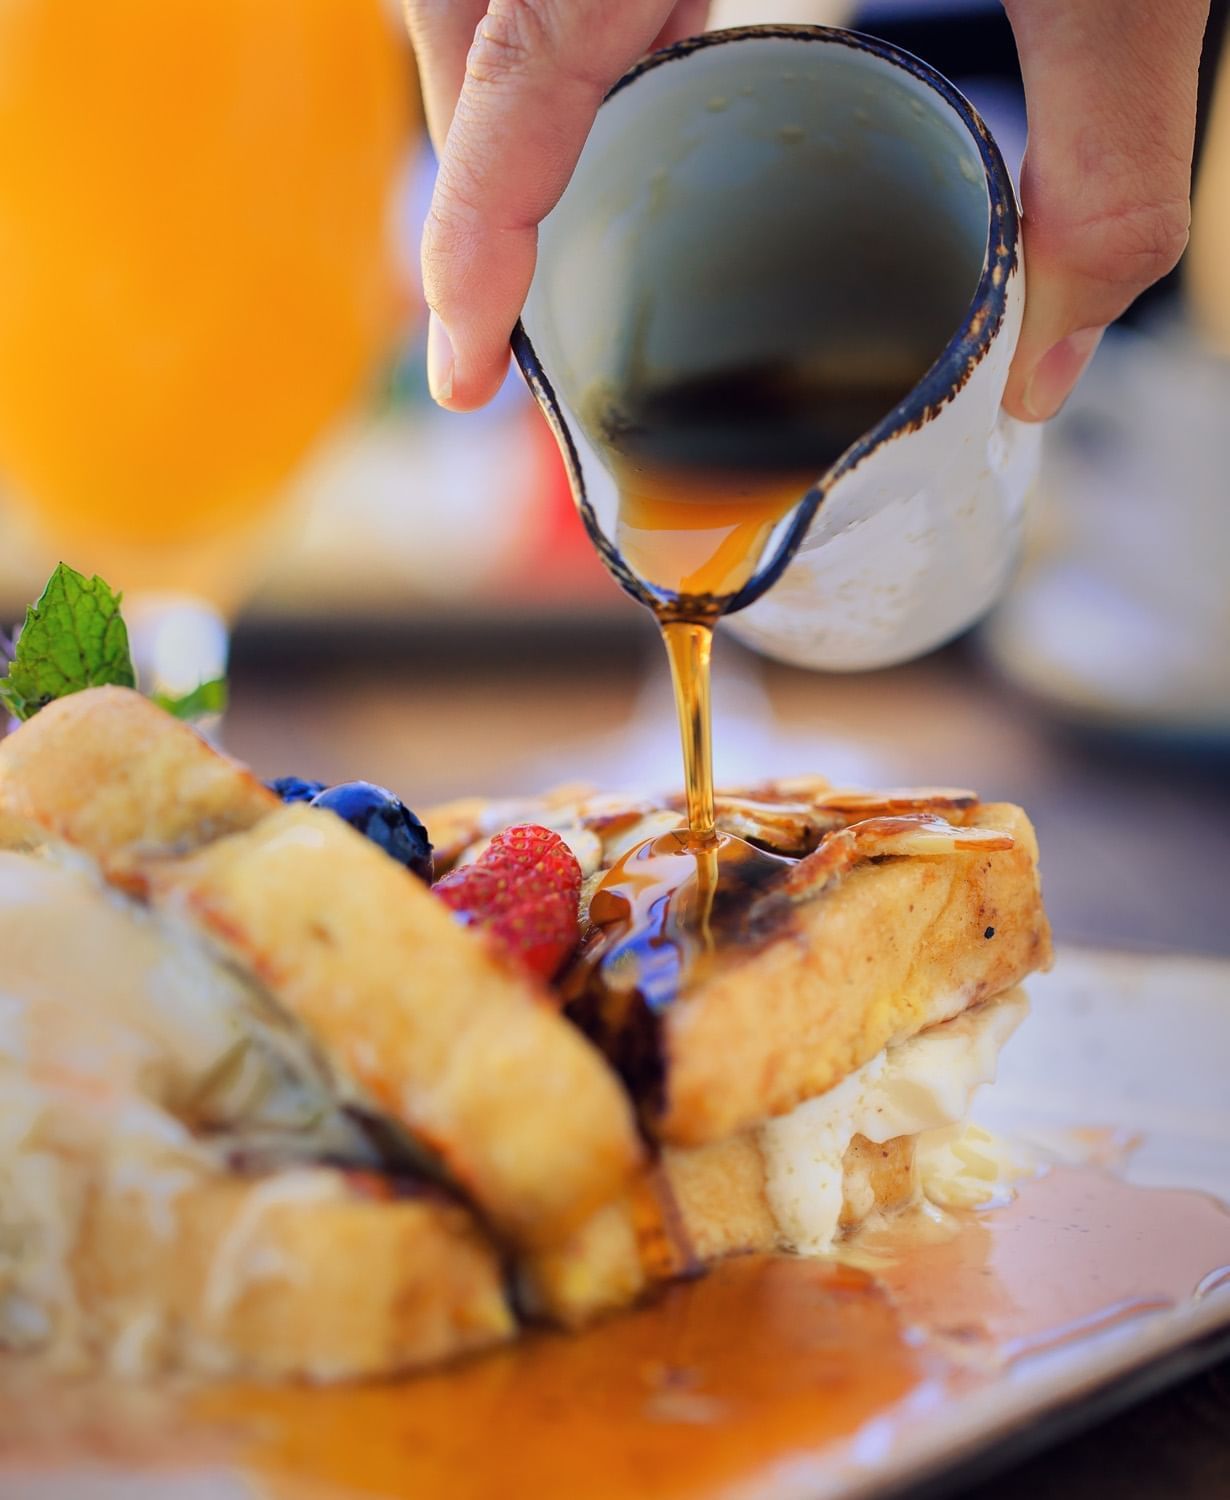 Cello Restaurant's french toast with syrup being poured over the